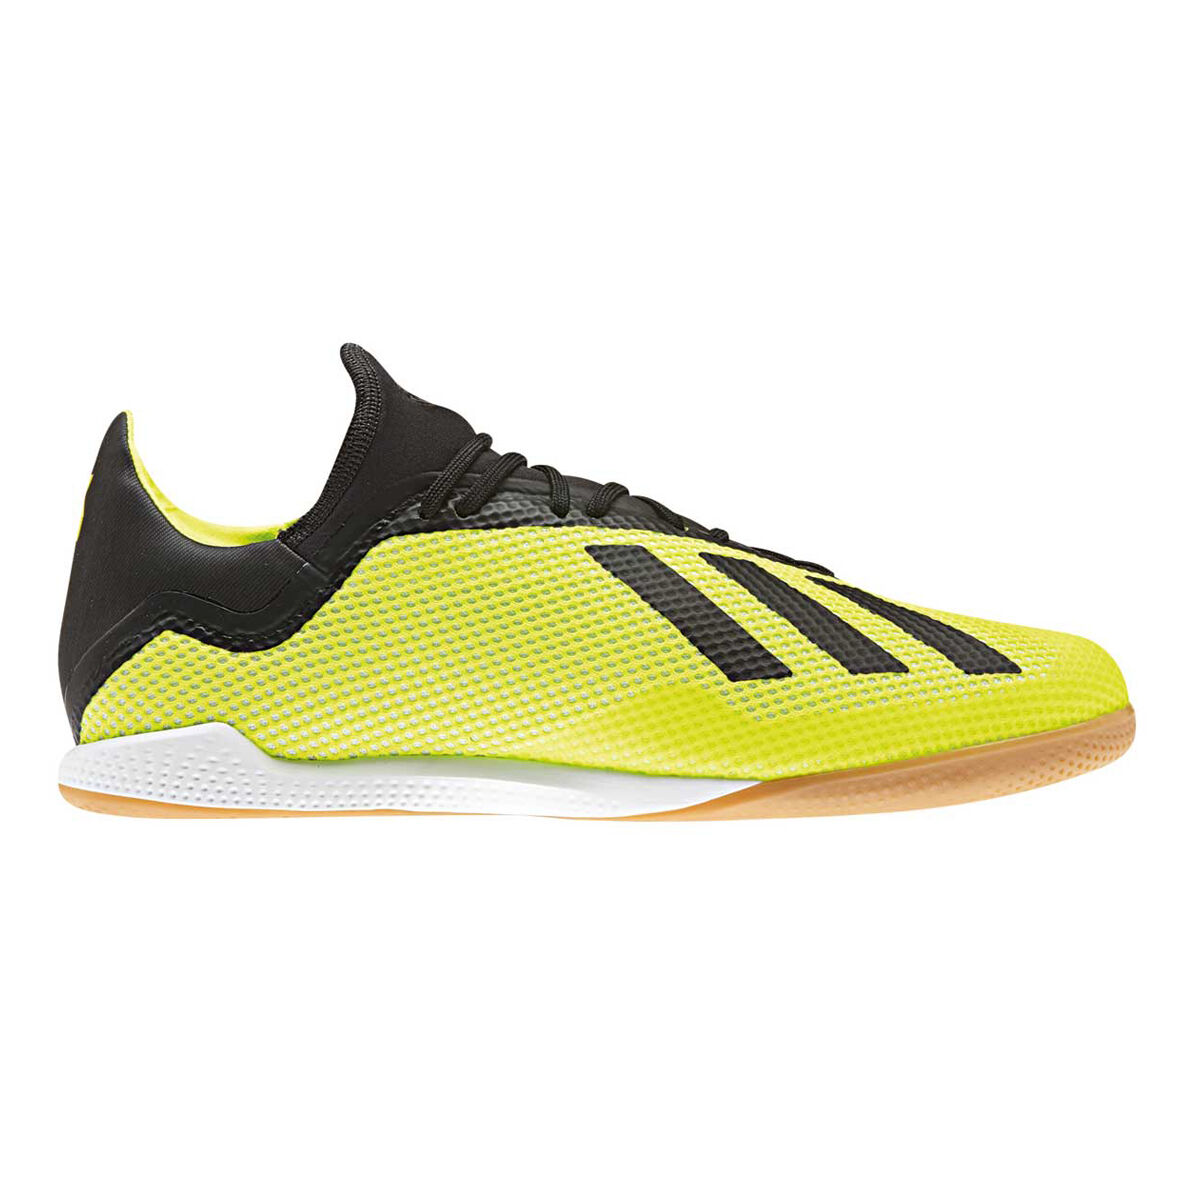 adidas x indoor soccer shoes